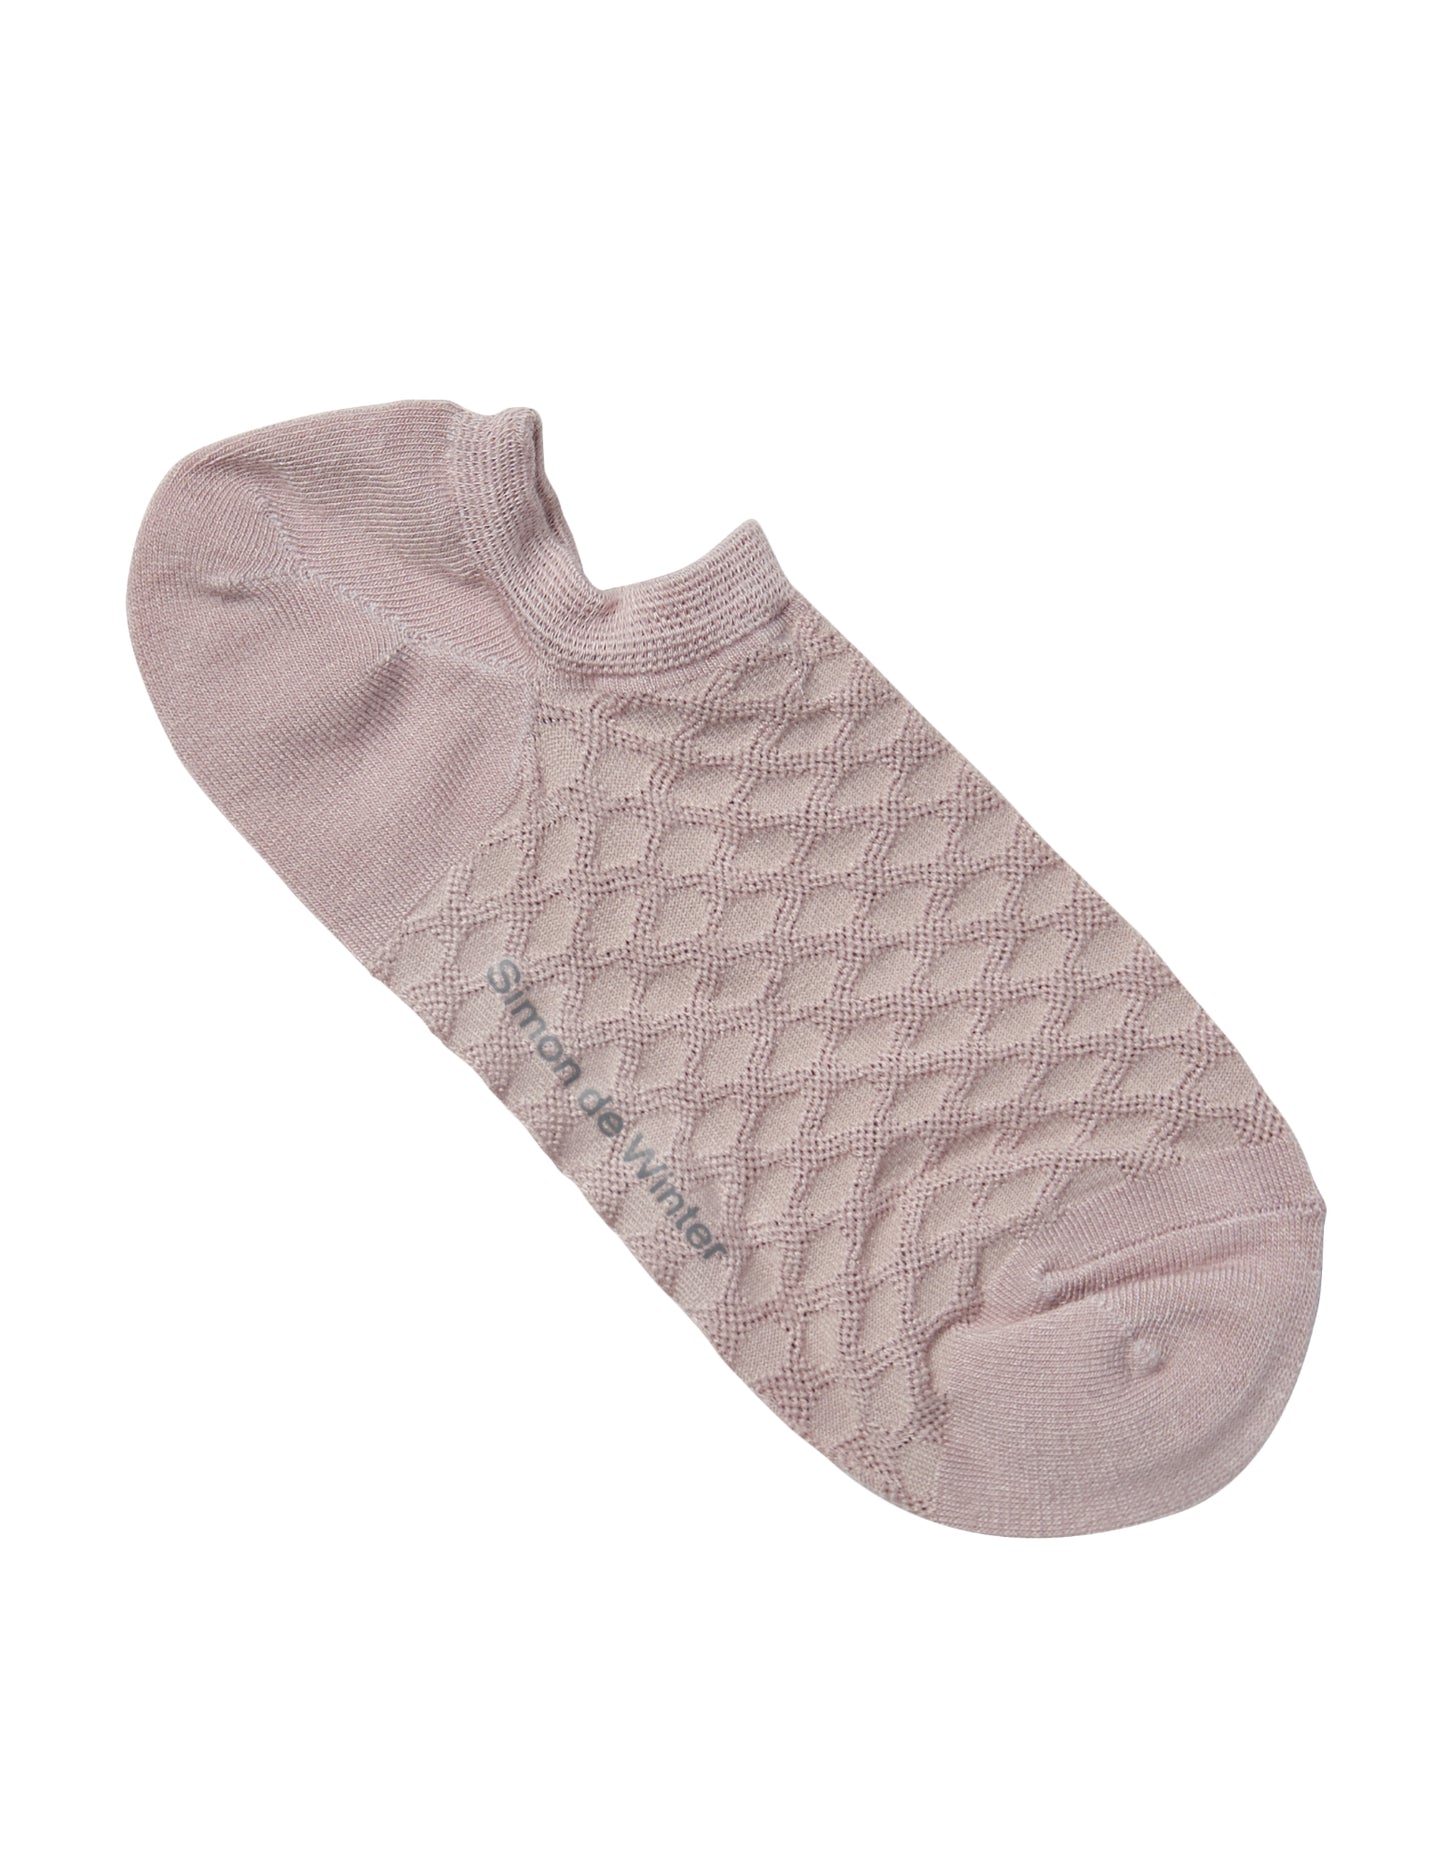 Side of Simon de Winter Women's Textured Viscose from Bamboo No Show Socks in Smokey Rose